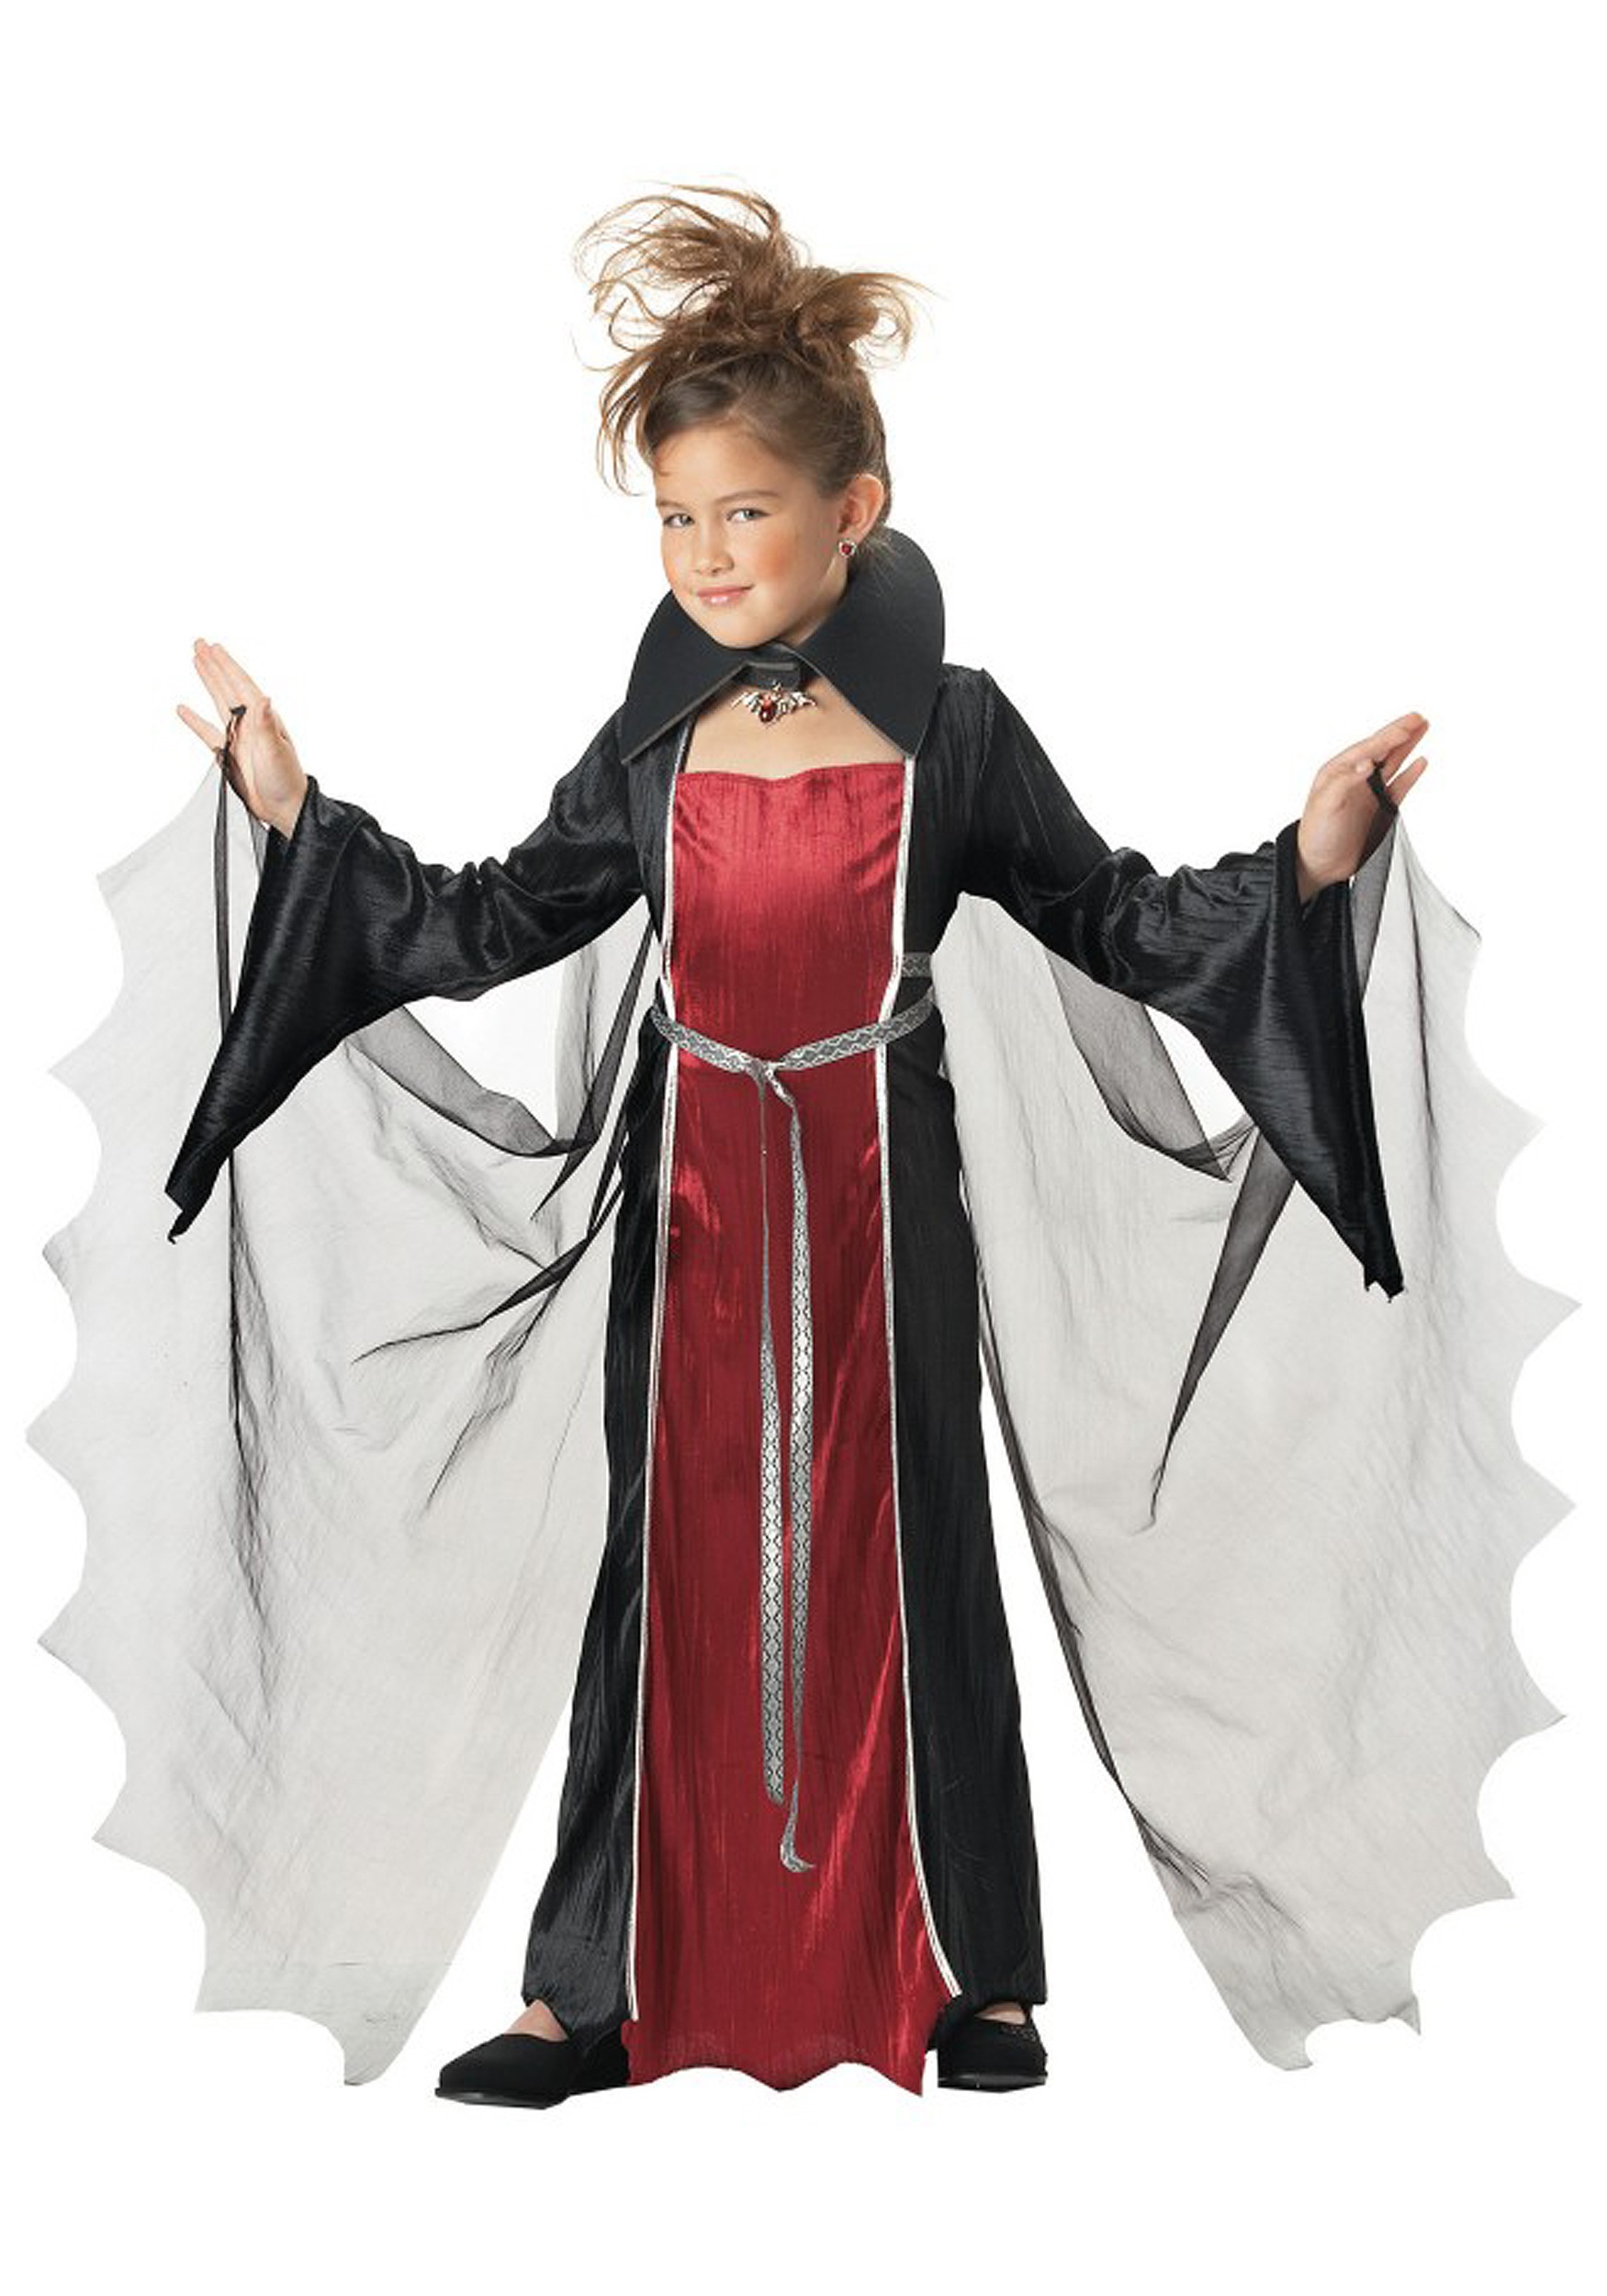 Photos - Fancy Dress California Costume Collection Vampire Costume for Girls Black/Red/ 